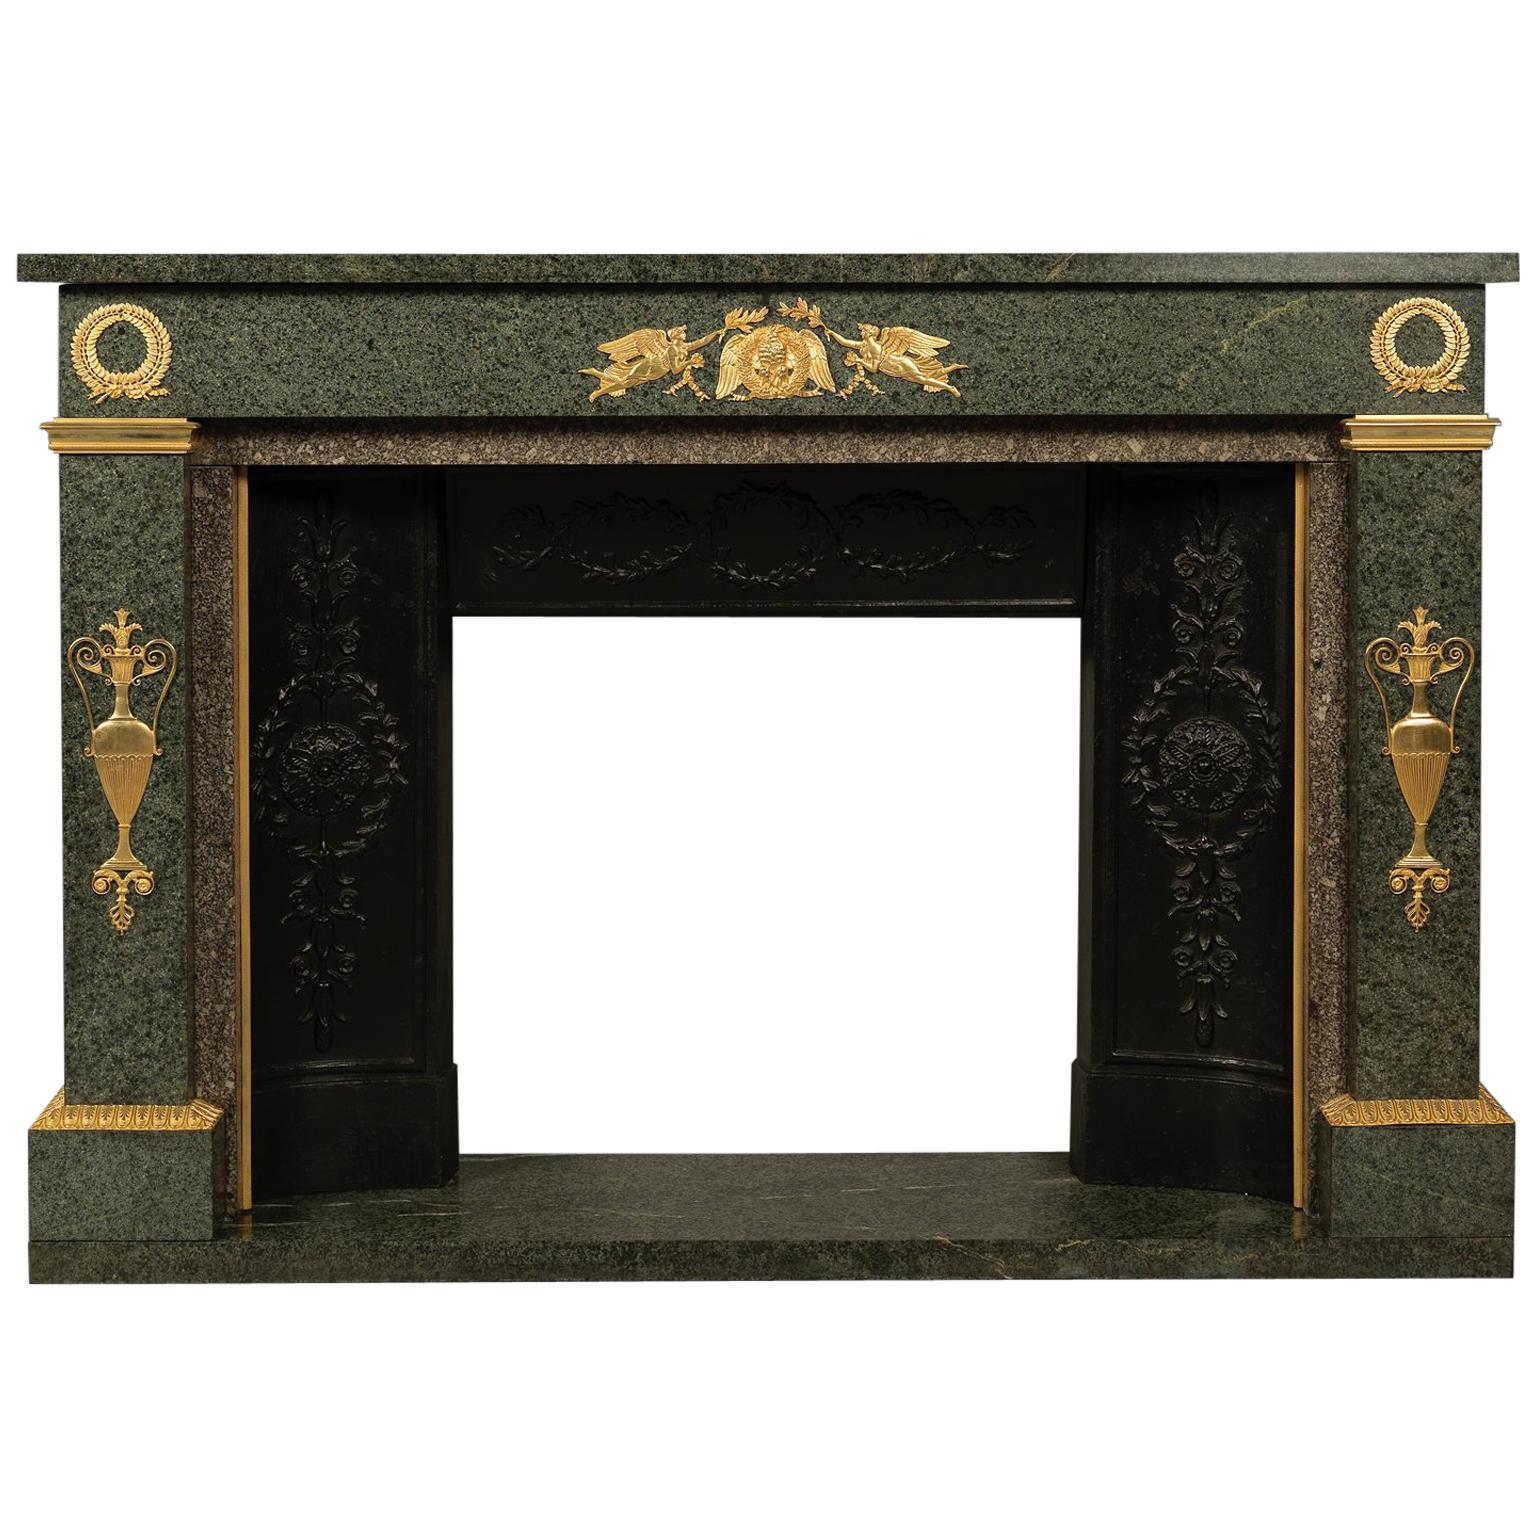 Empire Style Gilt Bronze-Mounted Green Granite Fireplace, circa 1850 For Sale